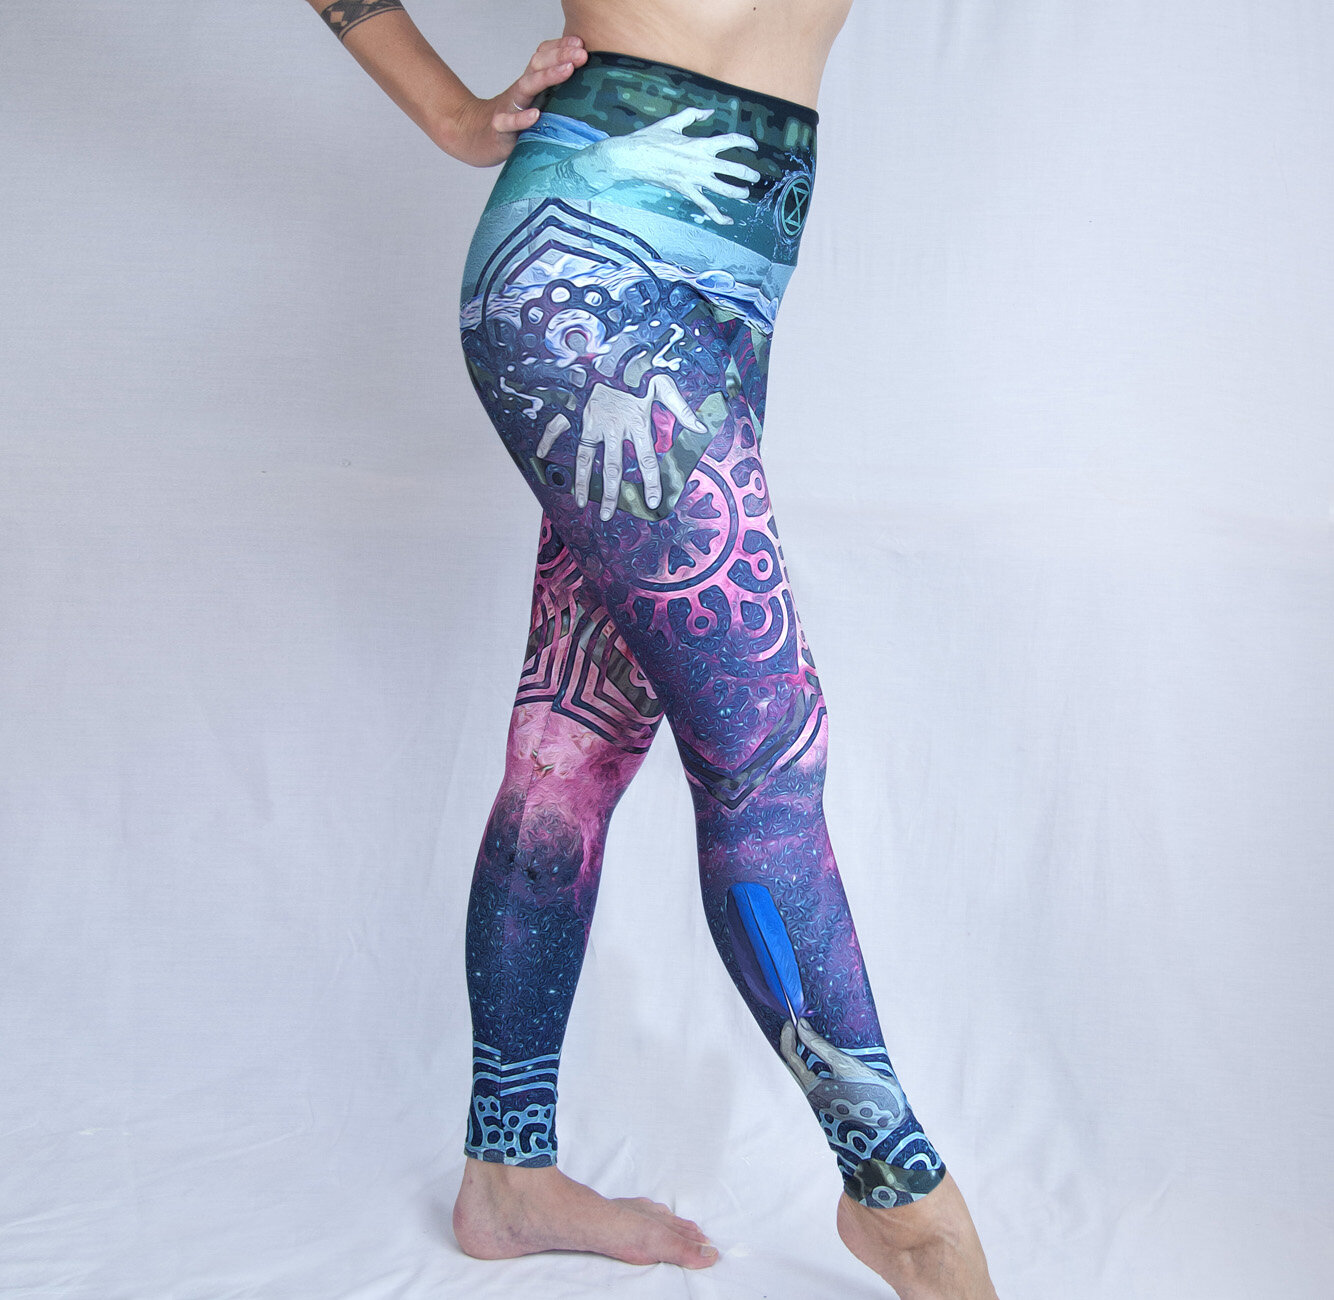 Ethically Made Sacred Geometry Art Printed Clothing for Yoga and